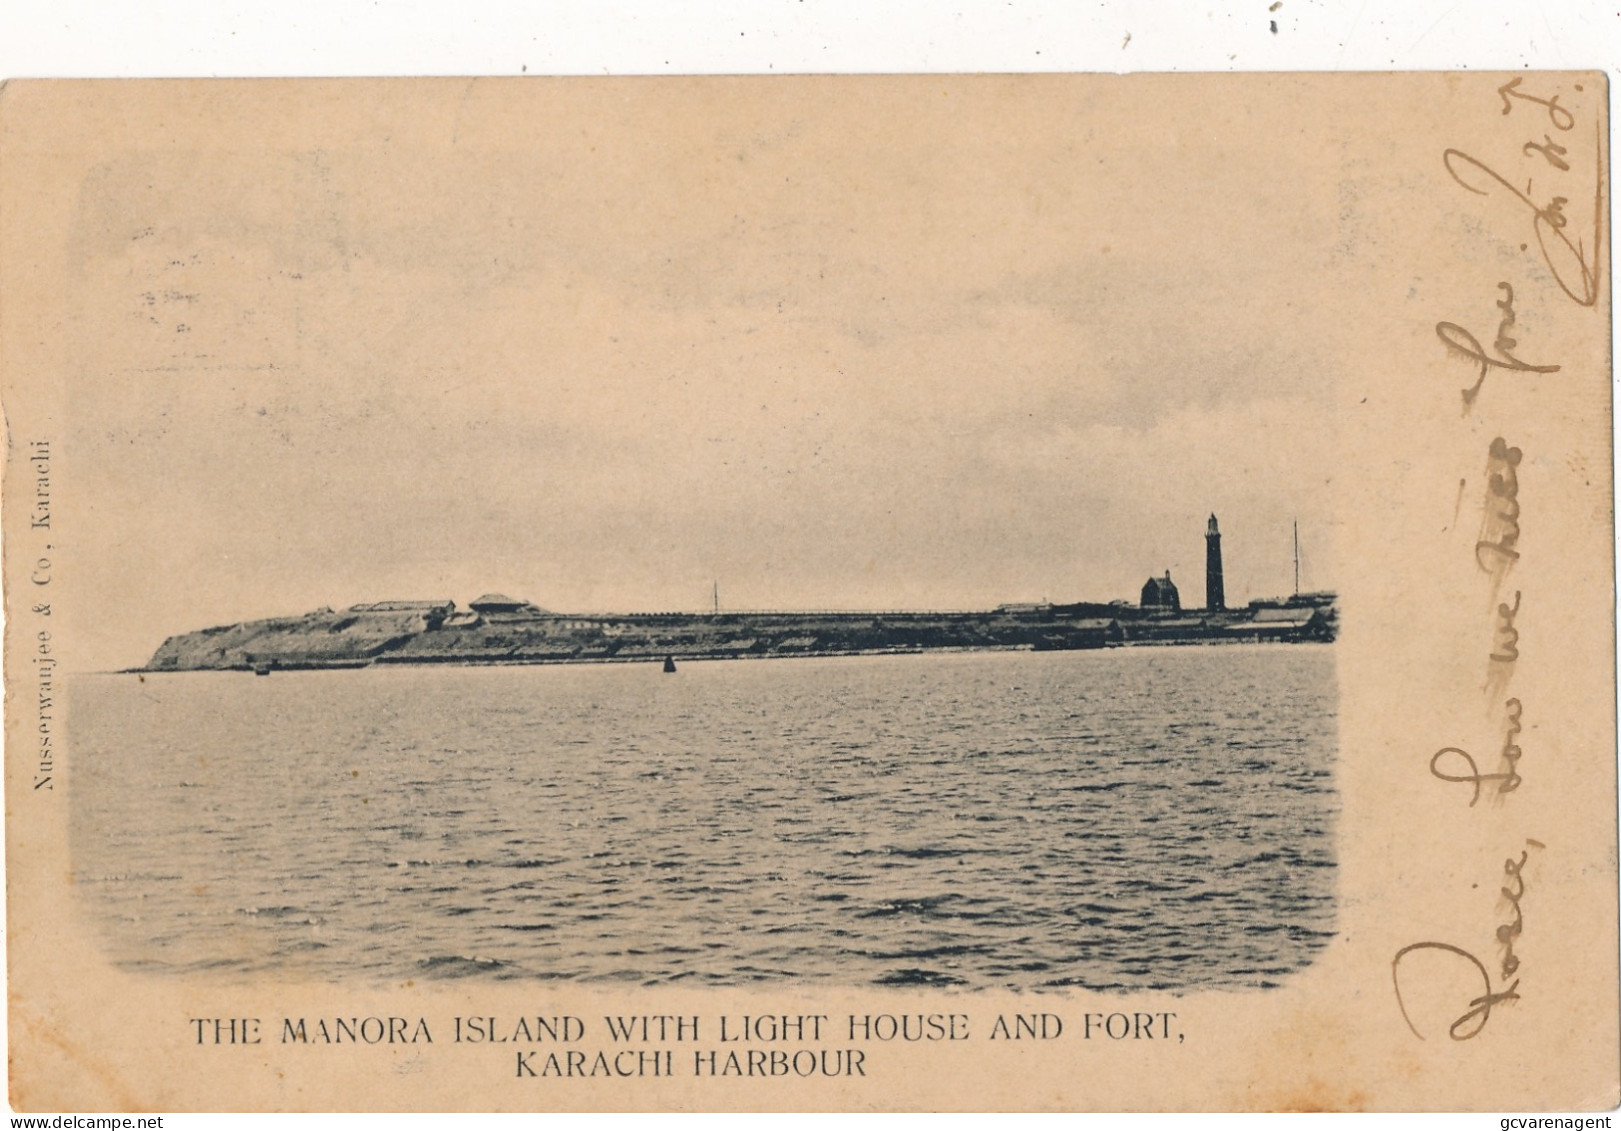 KARACHI HARBOUR  - THE MANORA ISLAND WITH LIGHT HOUSE AND FORT      2 SCANS - Pakistan